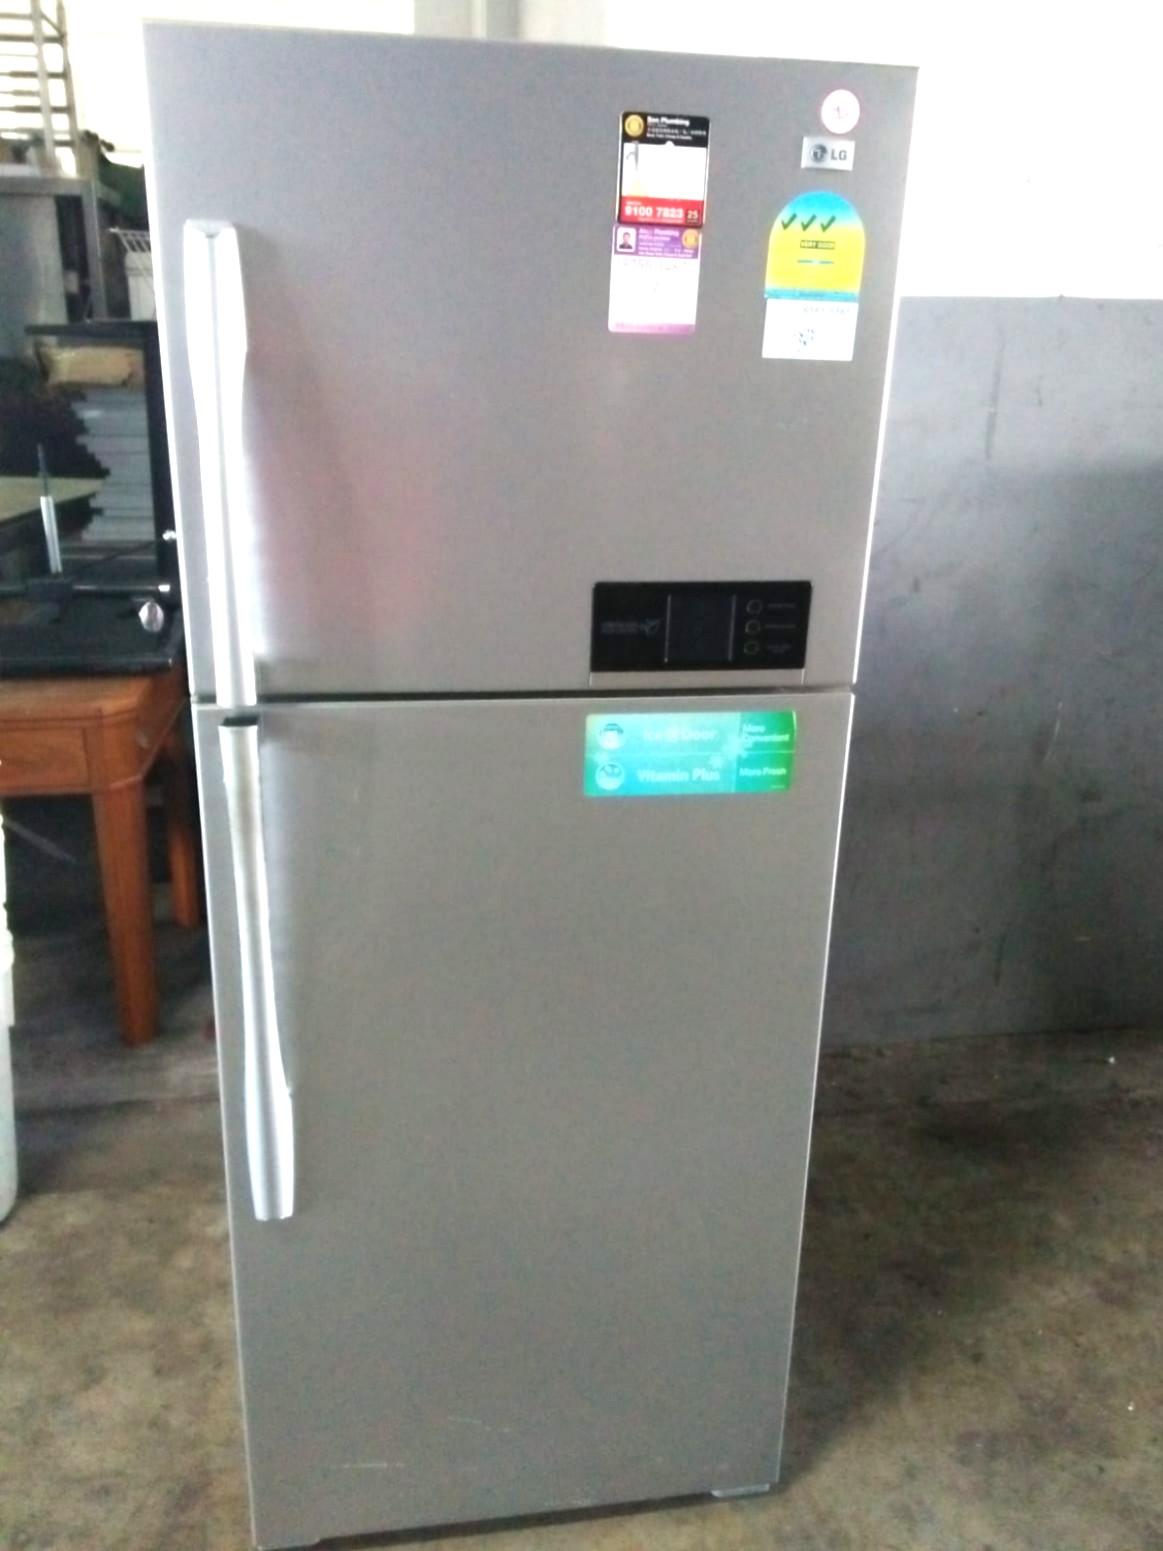 LG GR-M492YLY 2 Door Fridge Almost New Condition, TV & Home Appliances ...